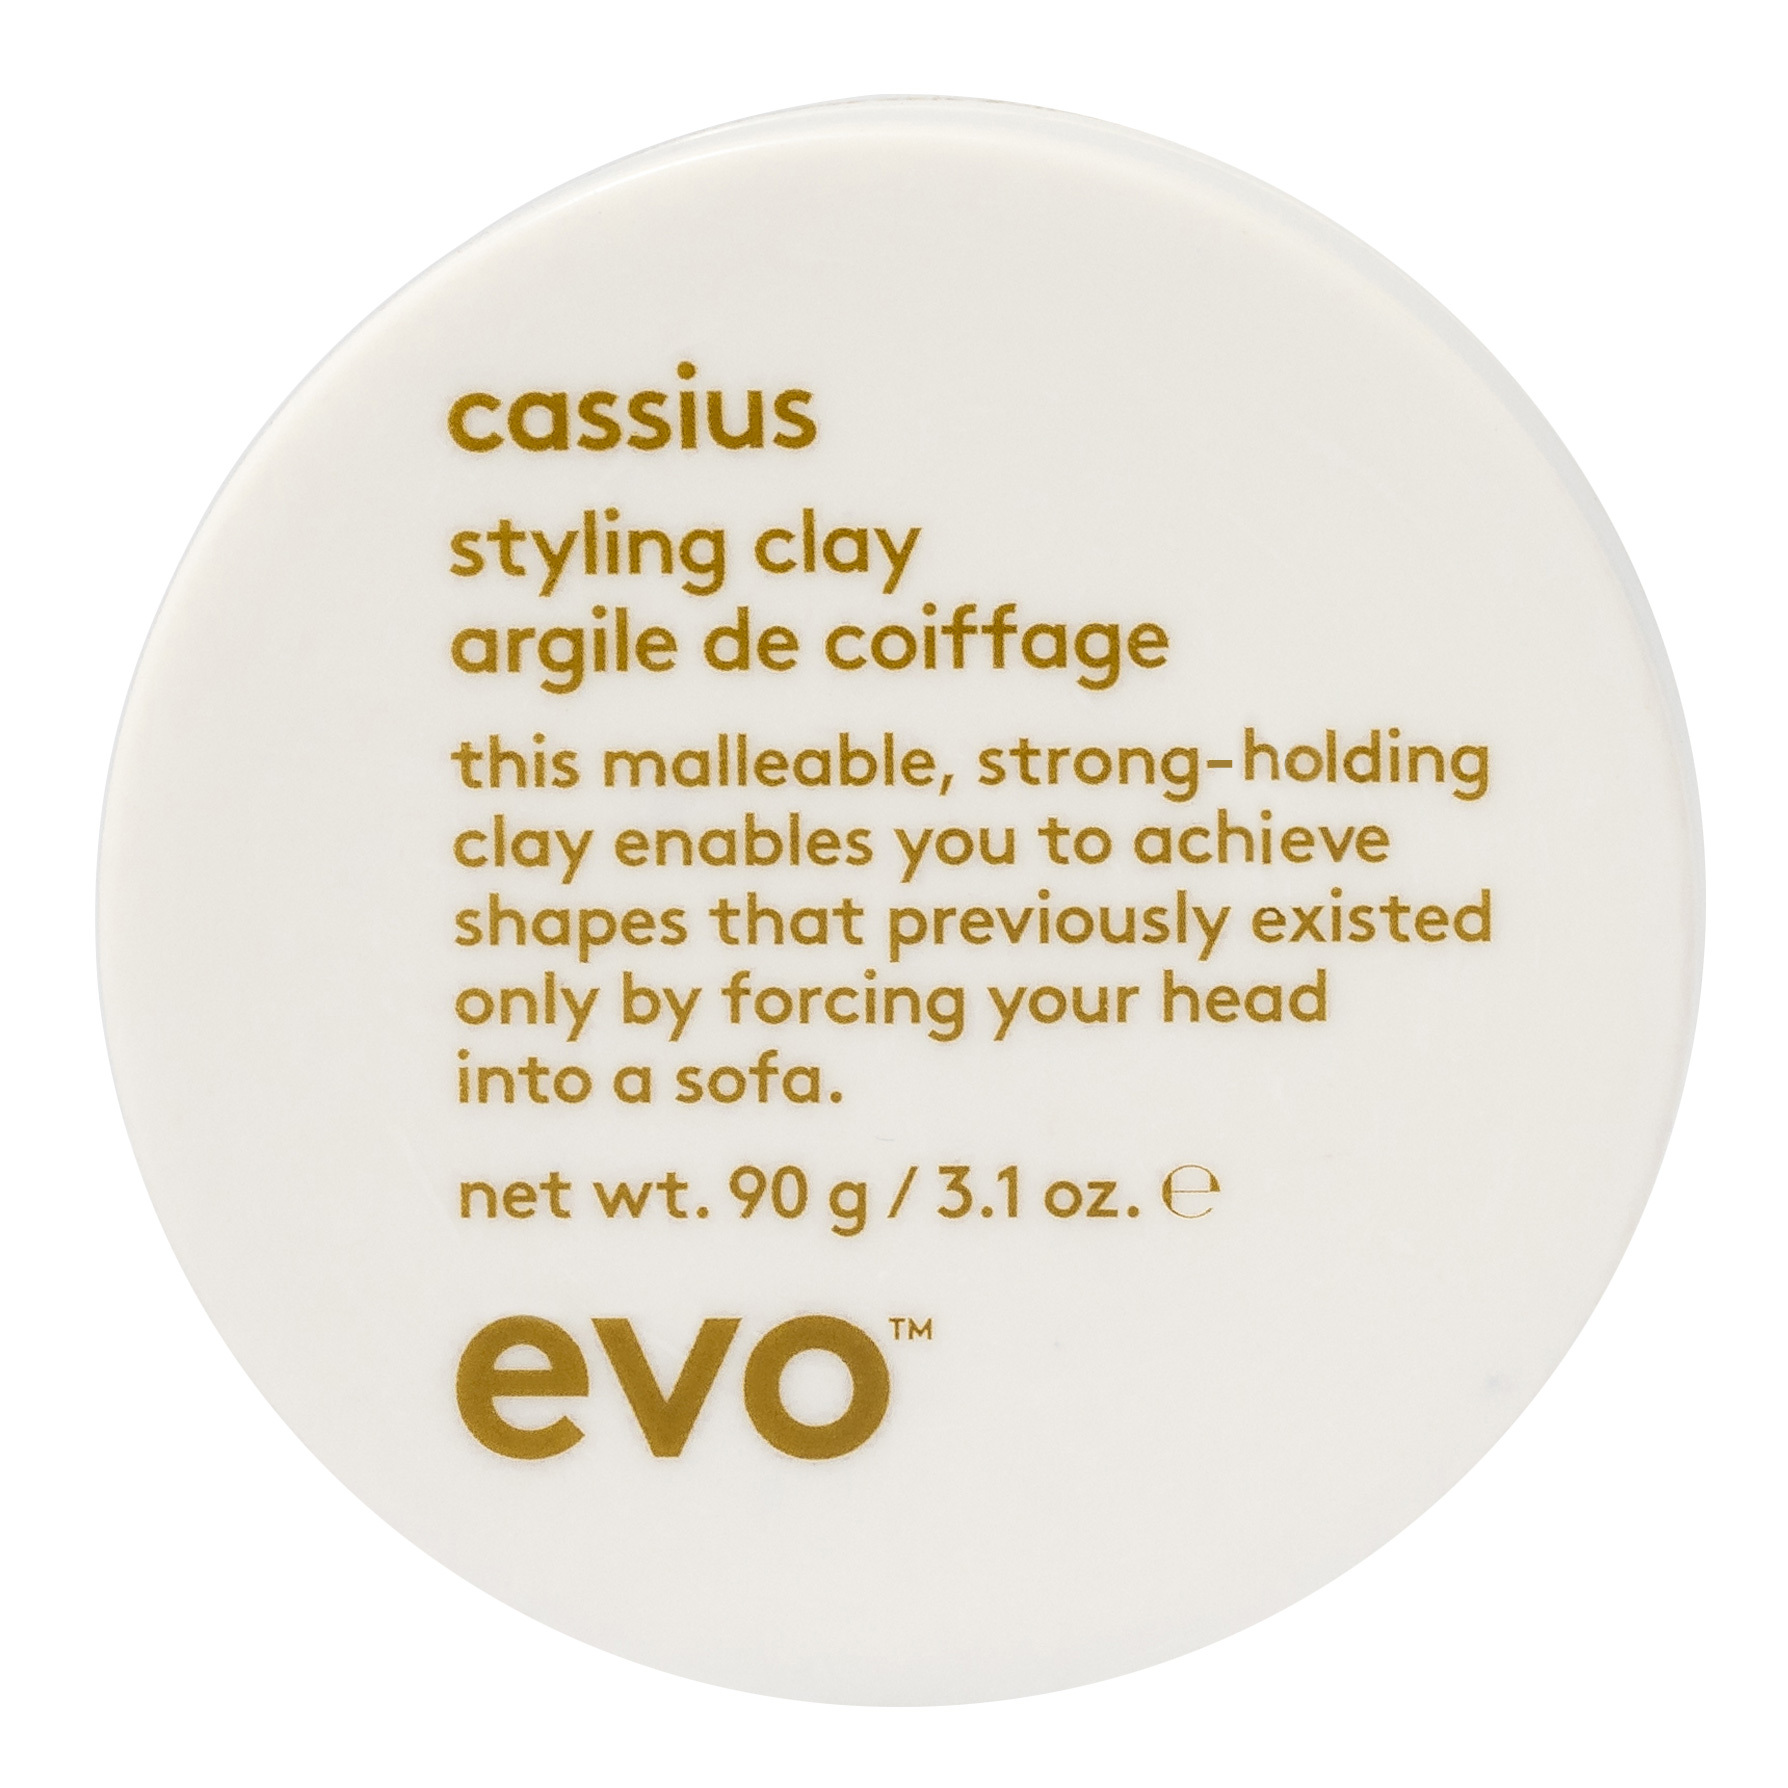 evo styling: cassius styling clay